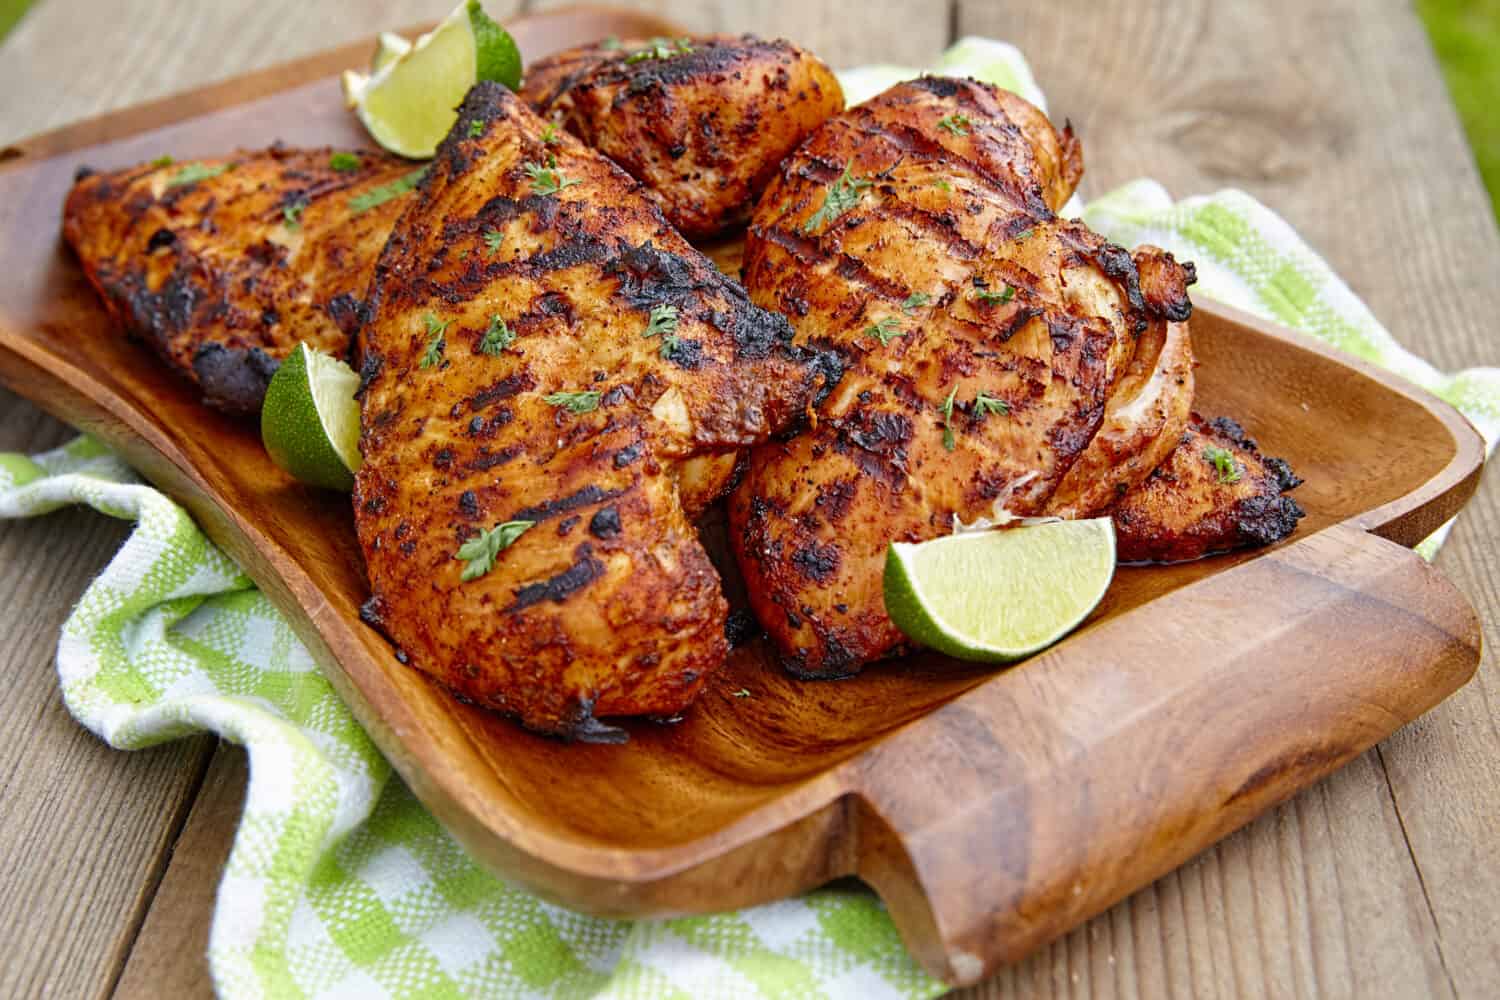 Grilled chicken breast served with herbs and lime